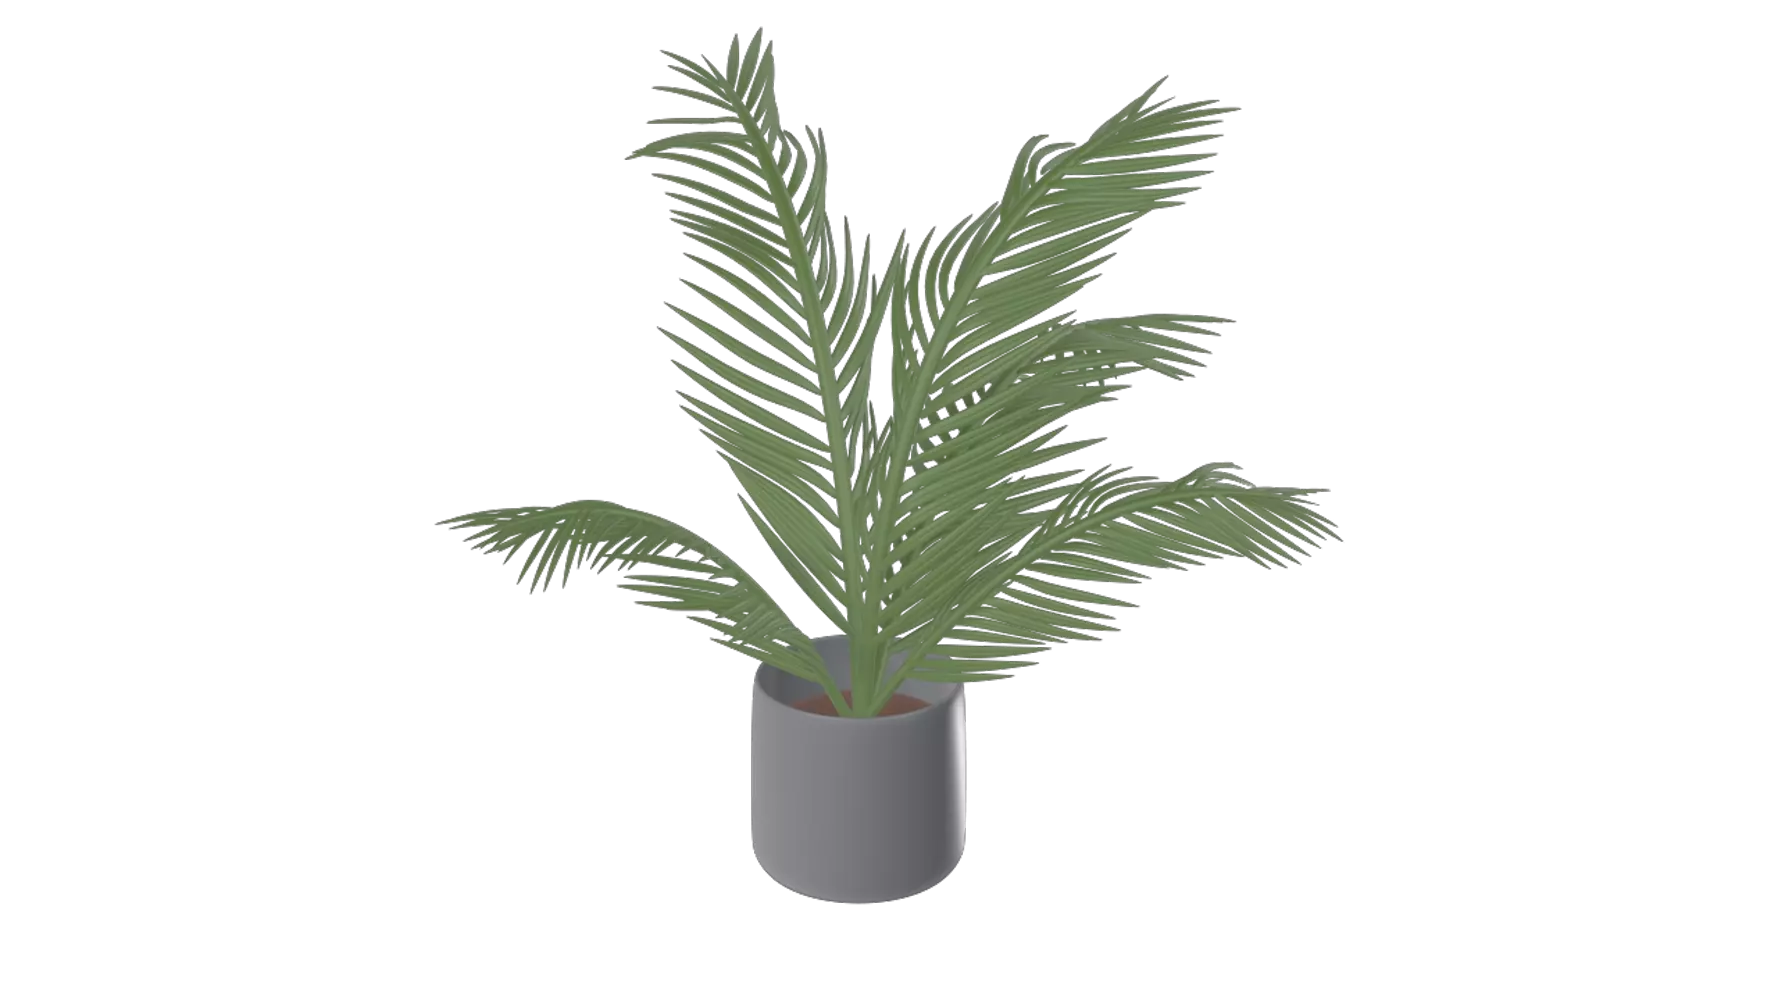 Coconut Tree With Pot 3D Graphic